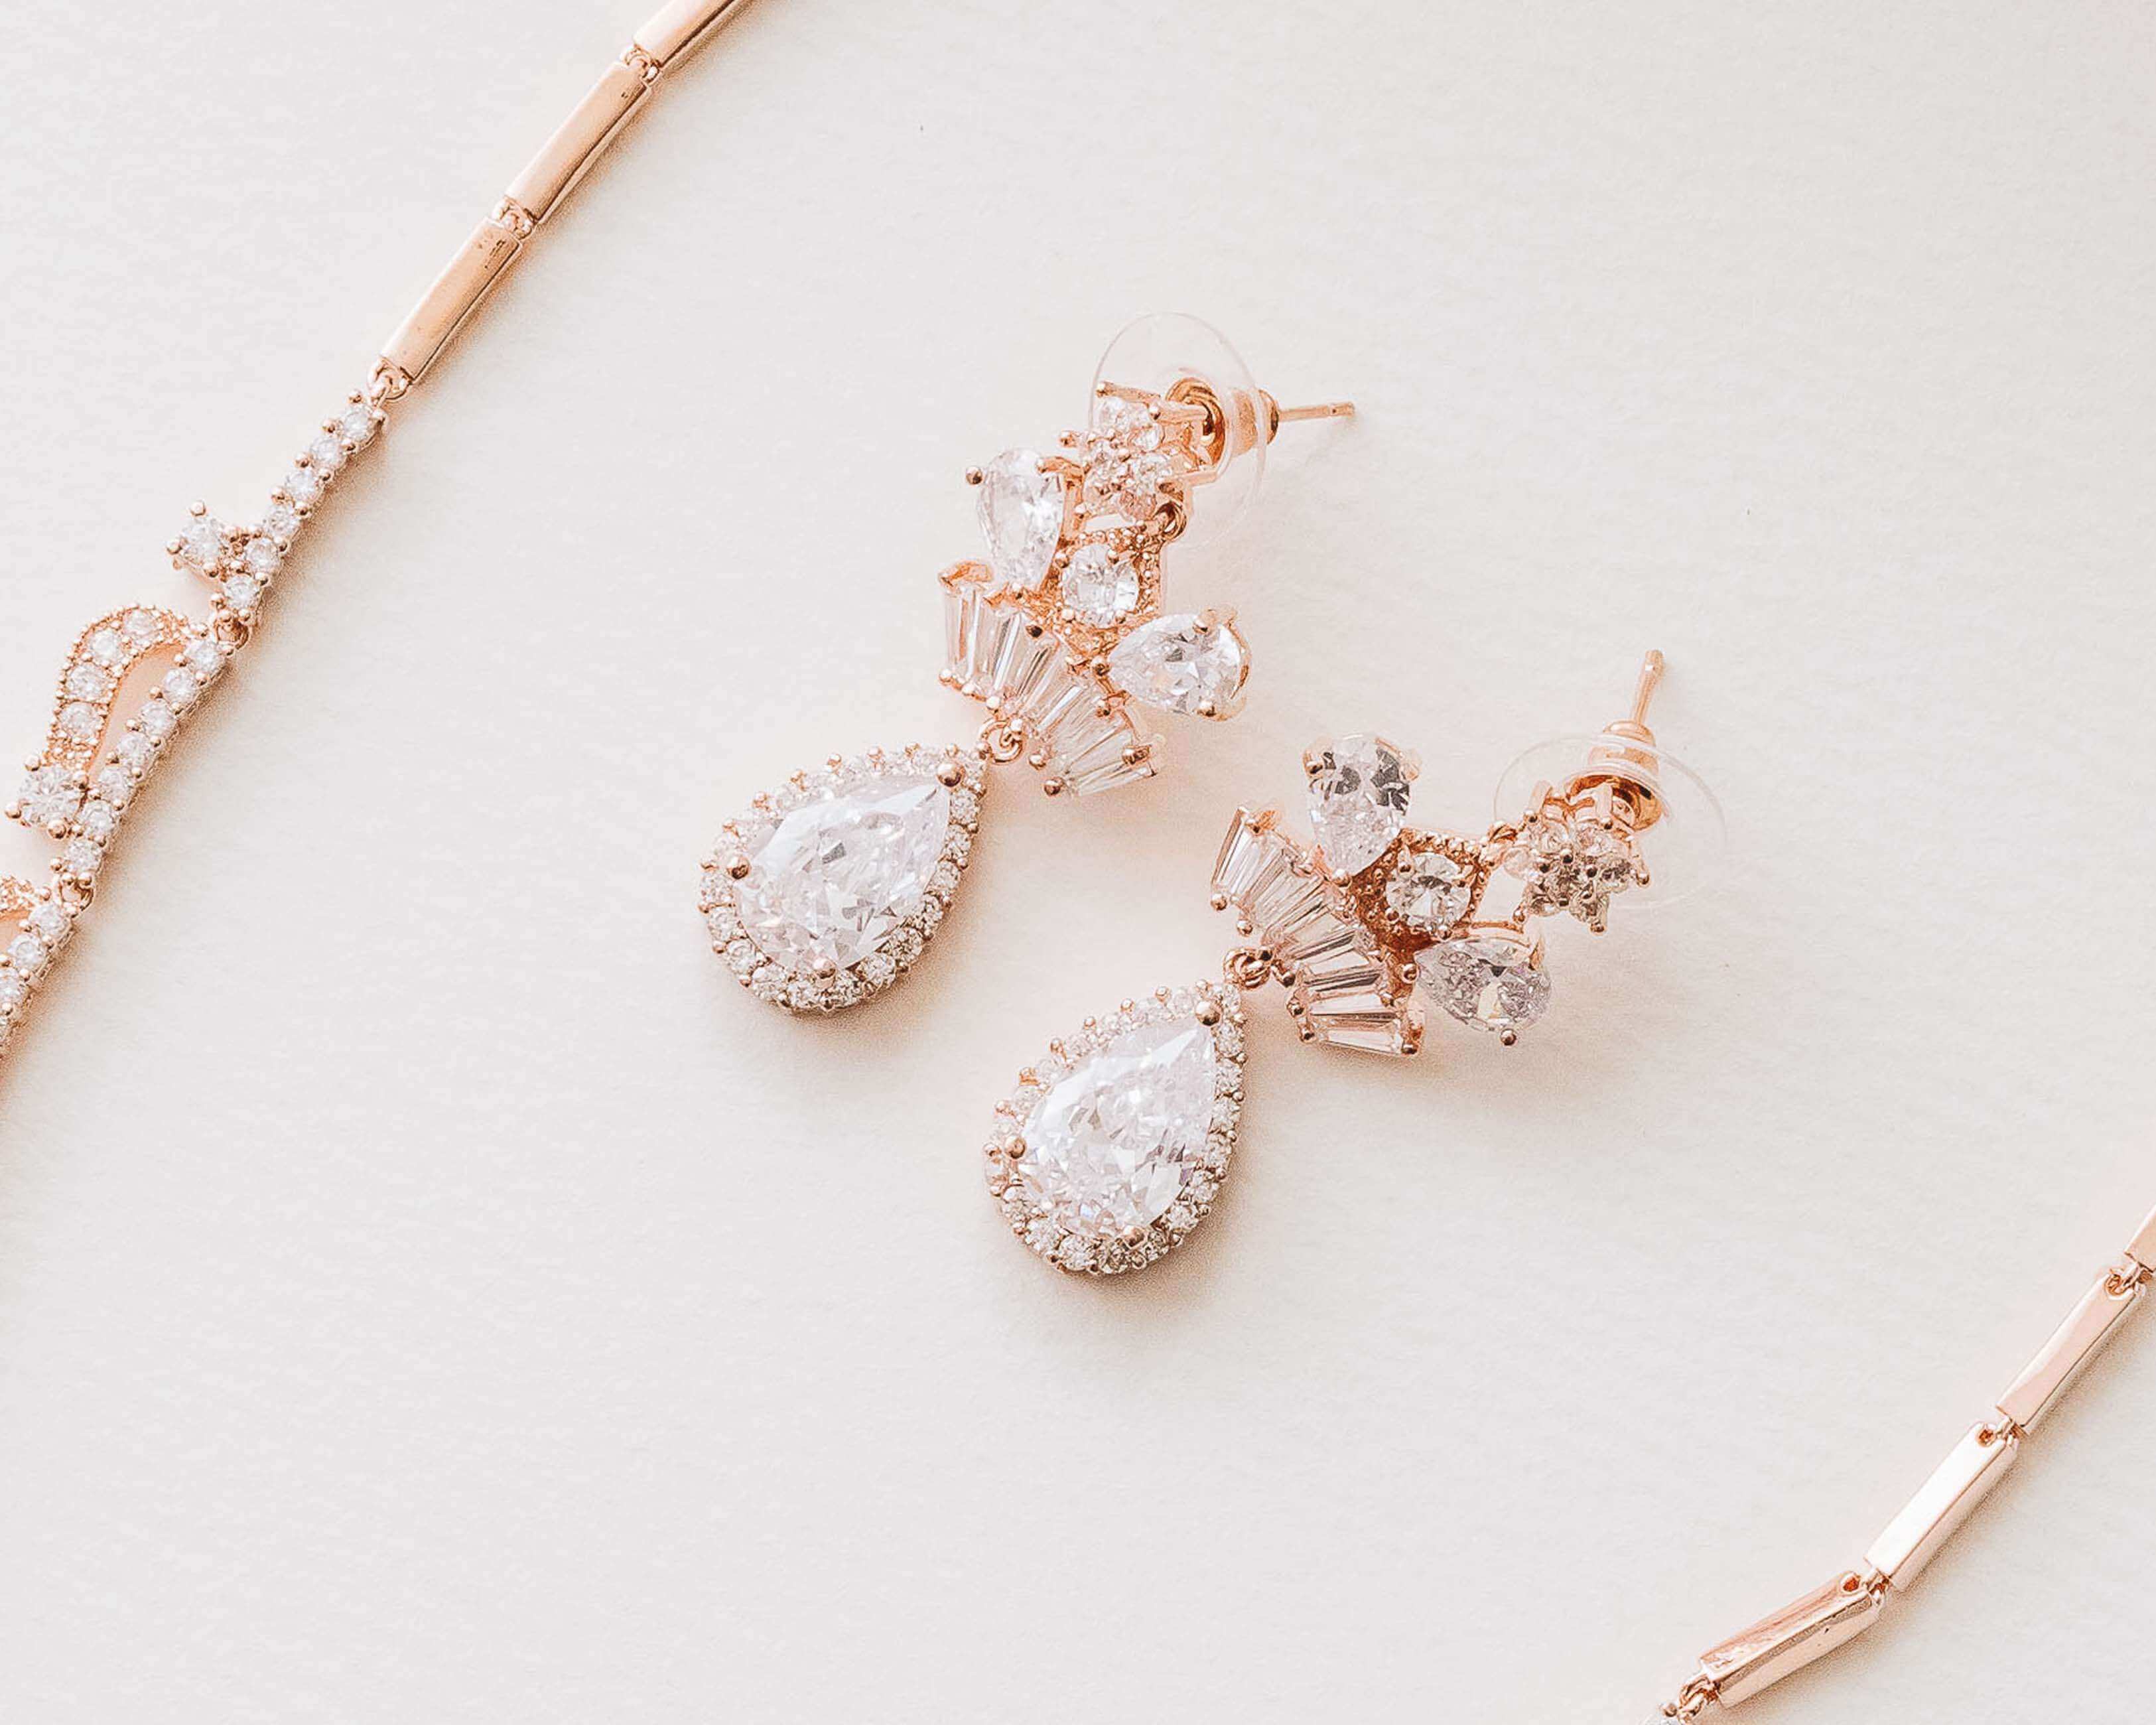 Rosegold Crystal Necklace Jewelry Set - The perfect wedding jewelry.